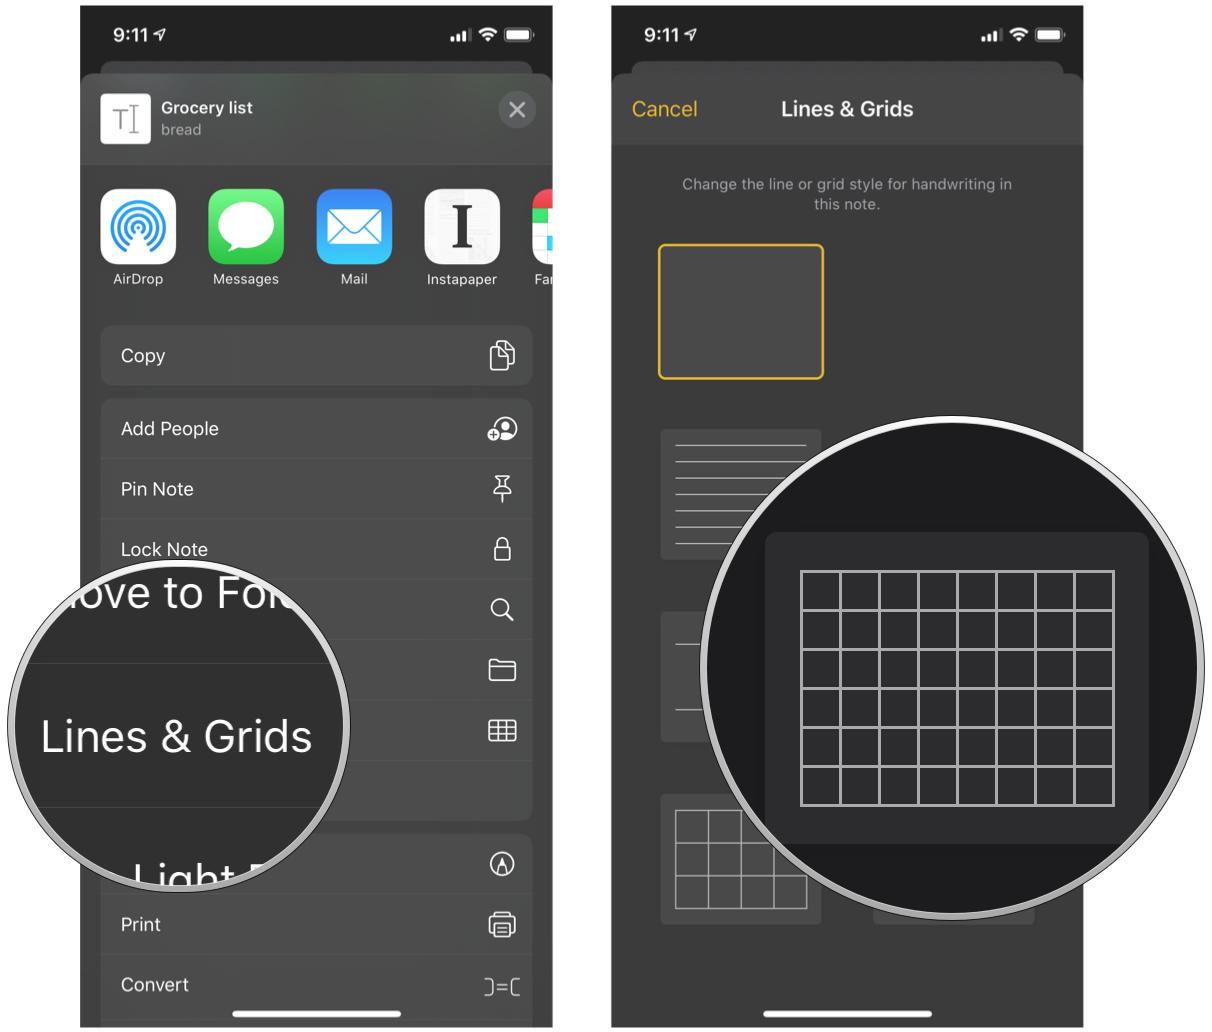 Access Lines and Grids from Action Extensions in an existing note in Notes on iPhone and iPad by showing steps: Tap Lines & Grids, then select the style you want